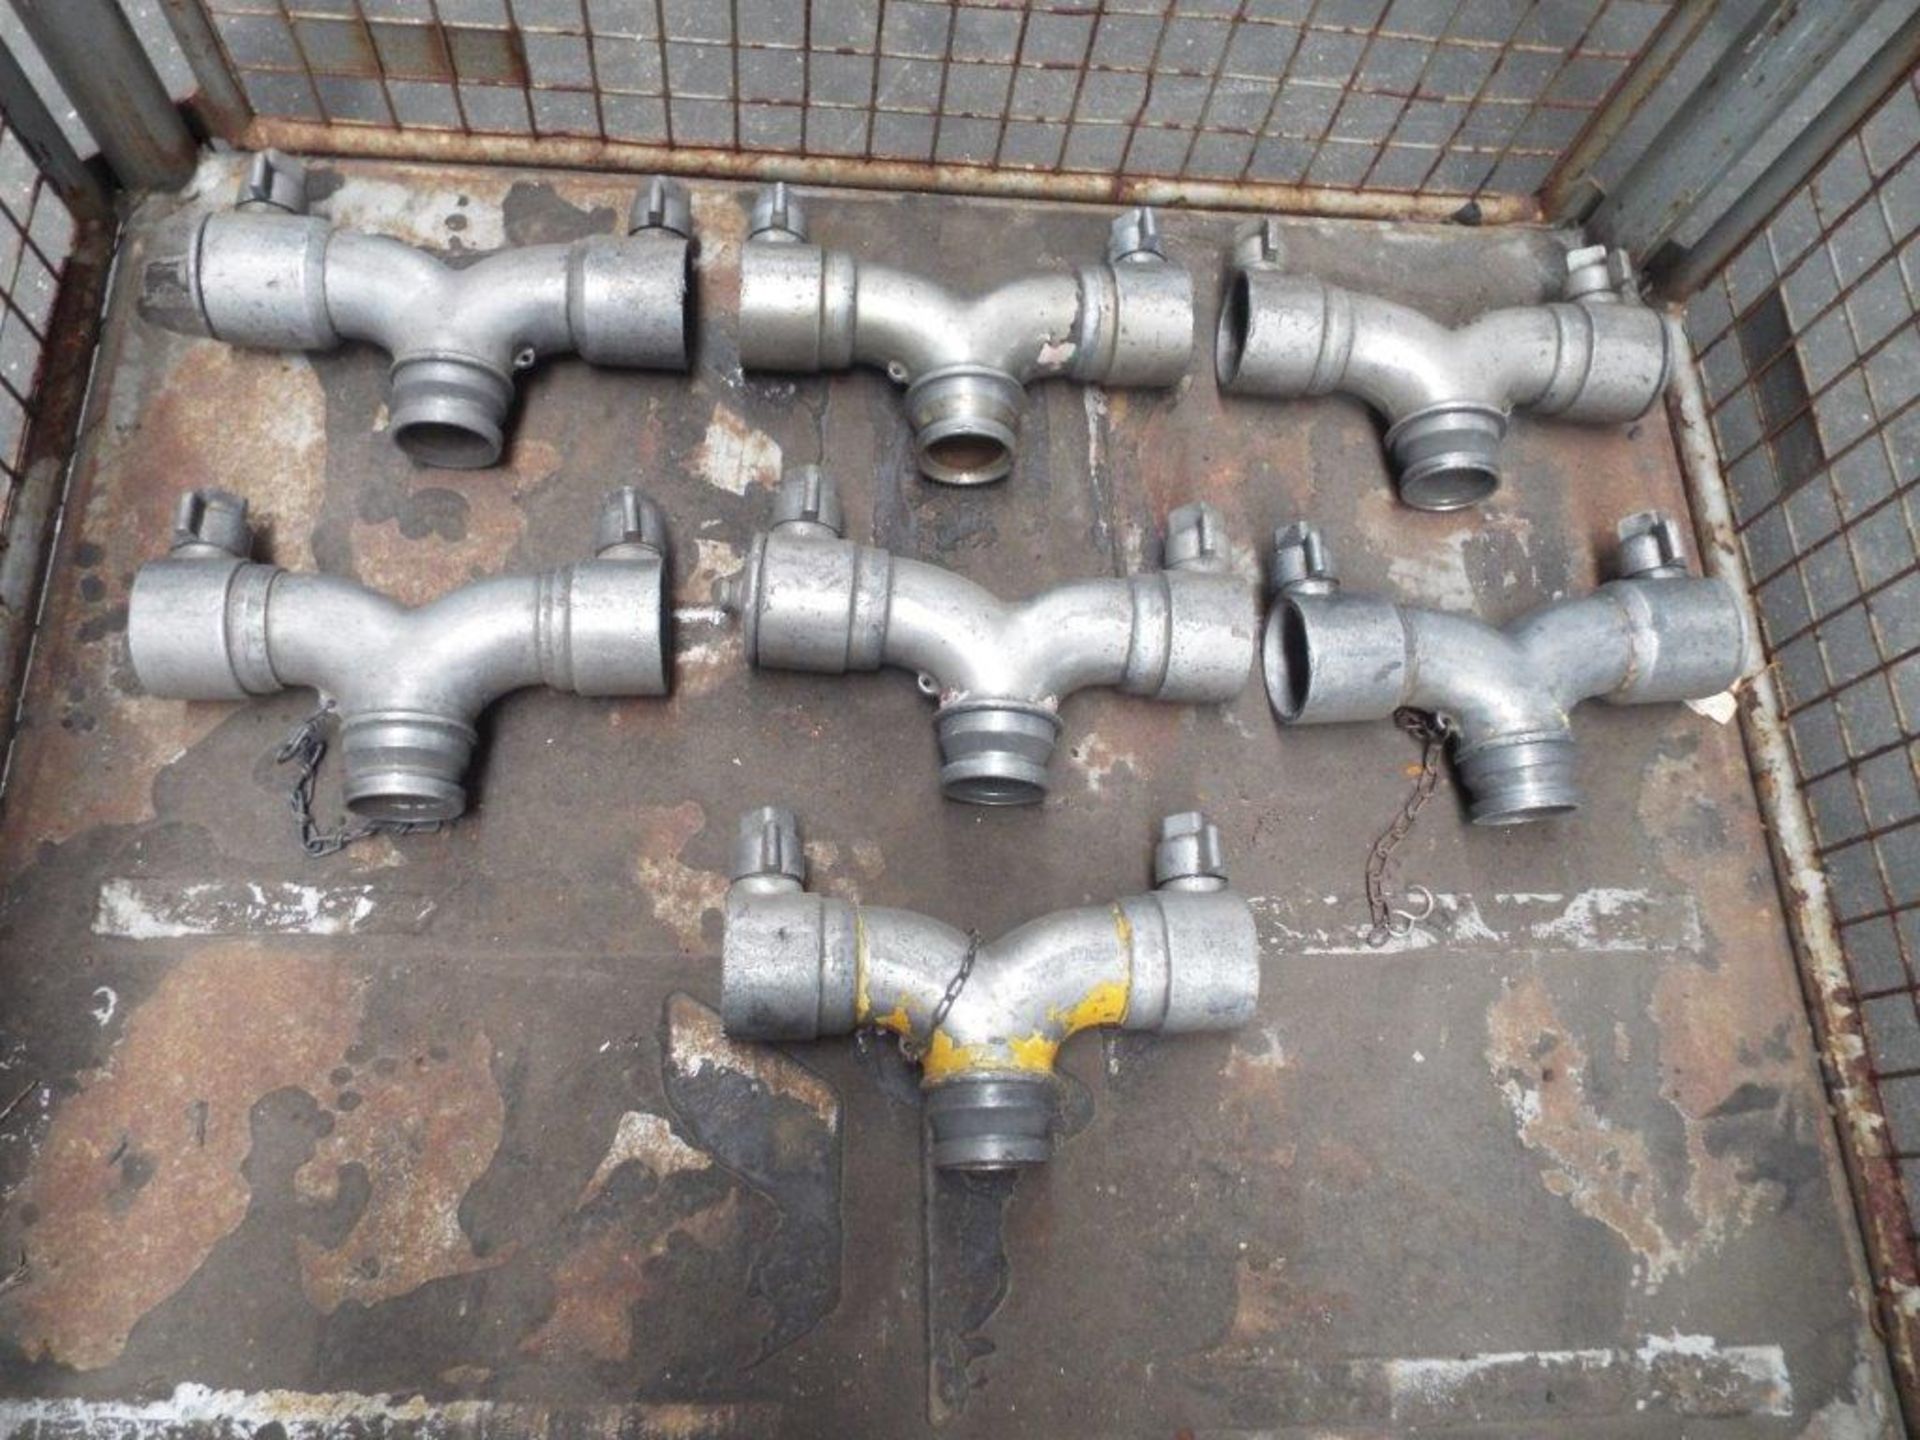 7 x Double Headed Standpipe Fittings